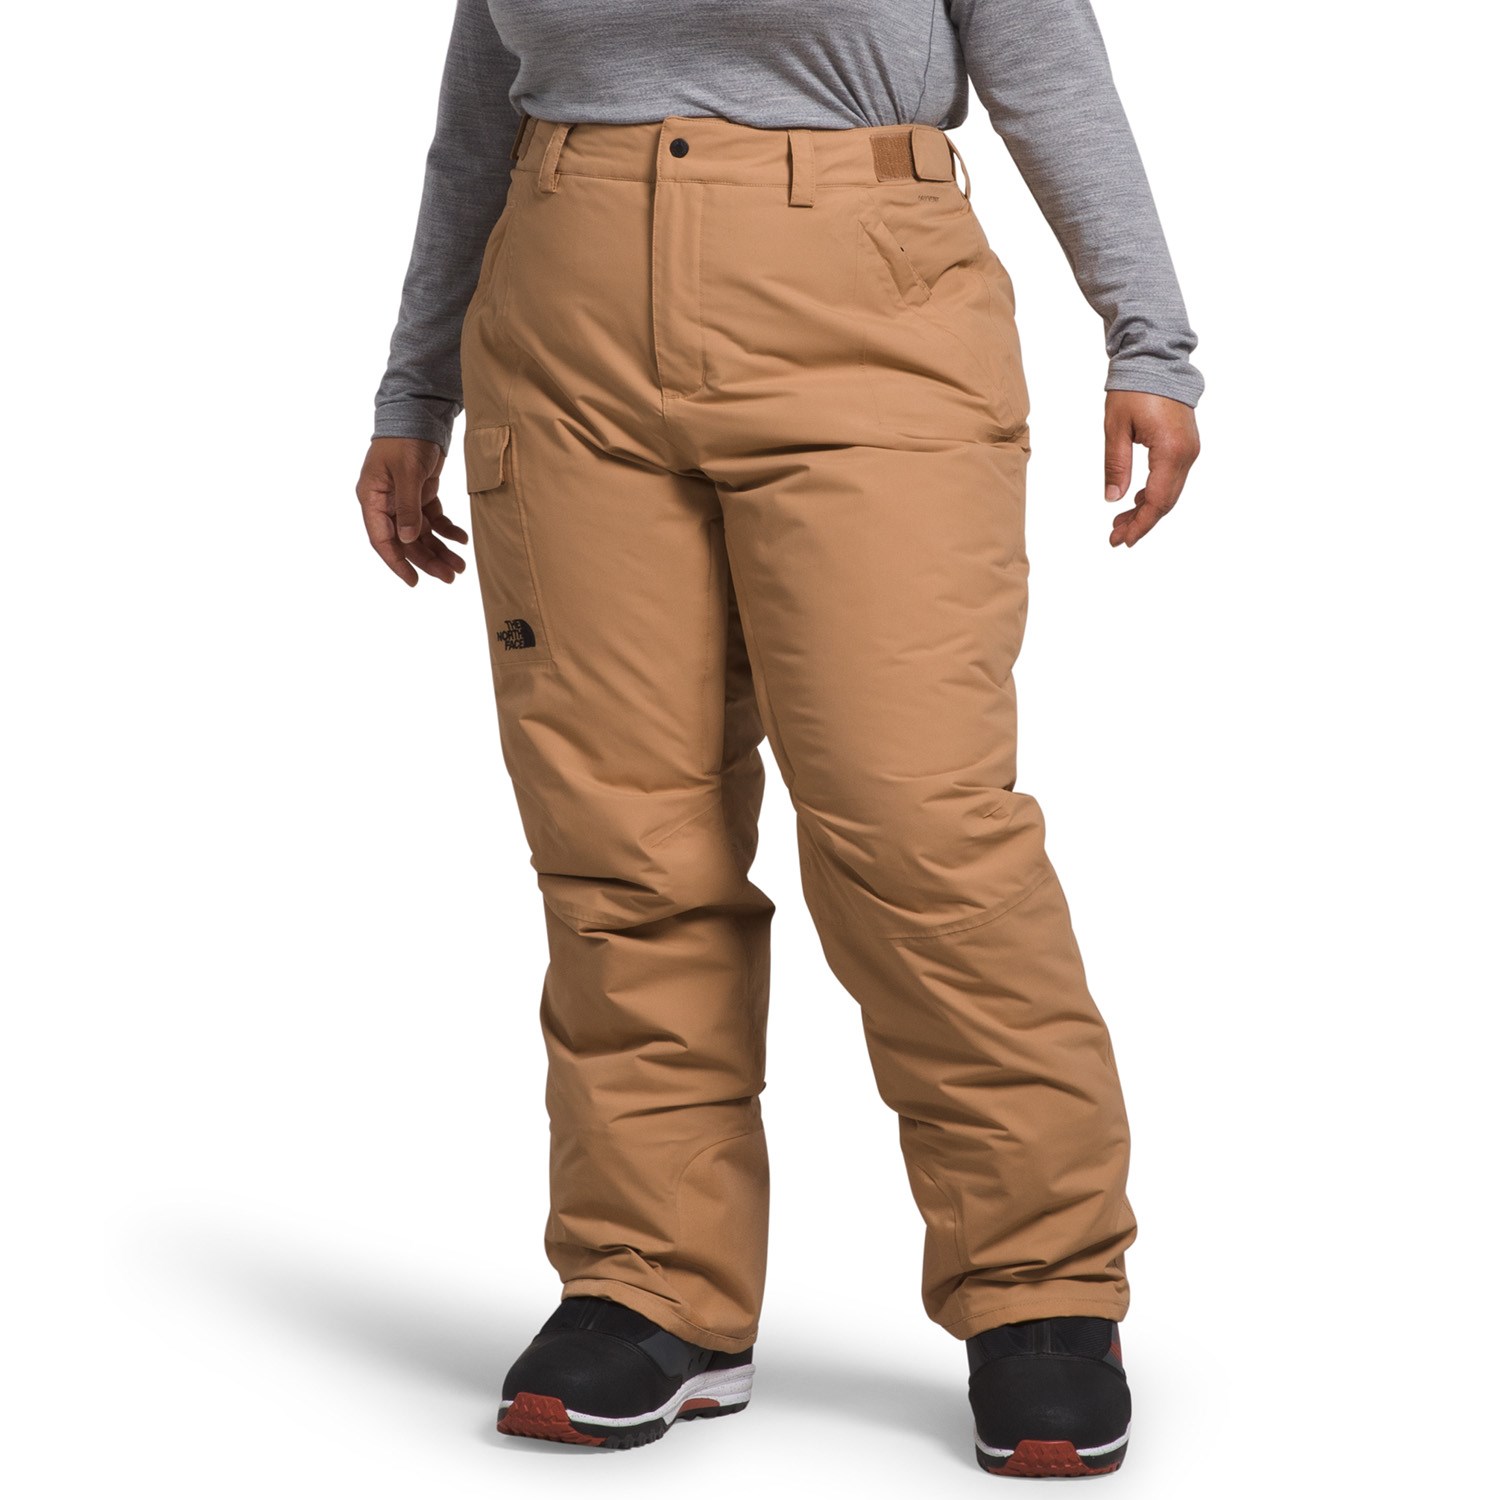 Брюки The North Face Freedom Insulated Plus Short, цвет Almond Butter брюки freedom bib женские the north face хаки